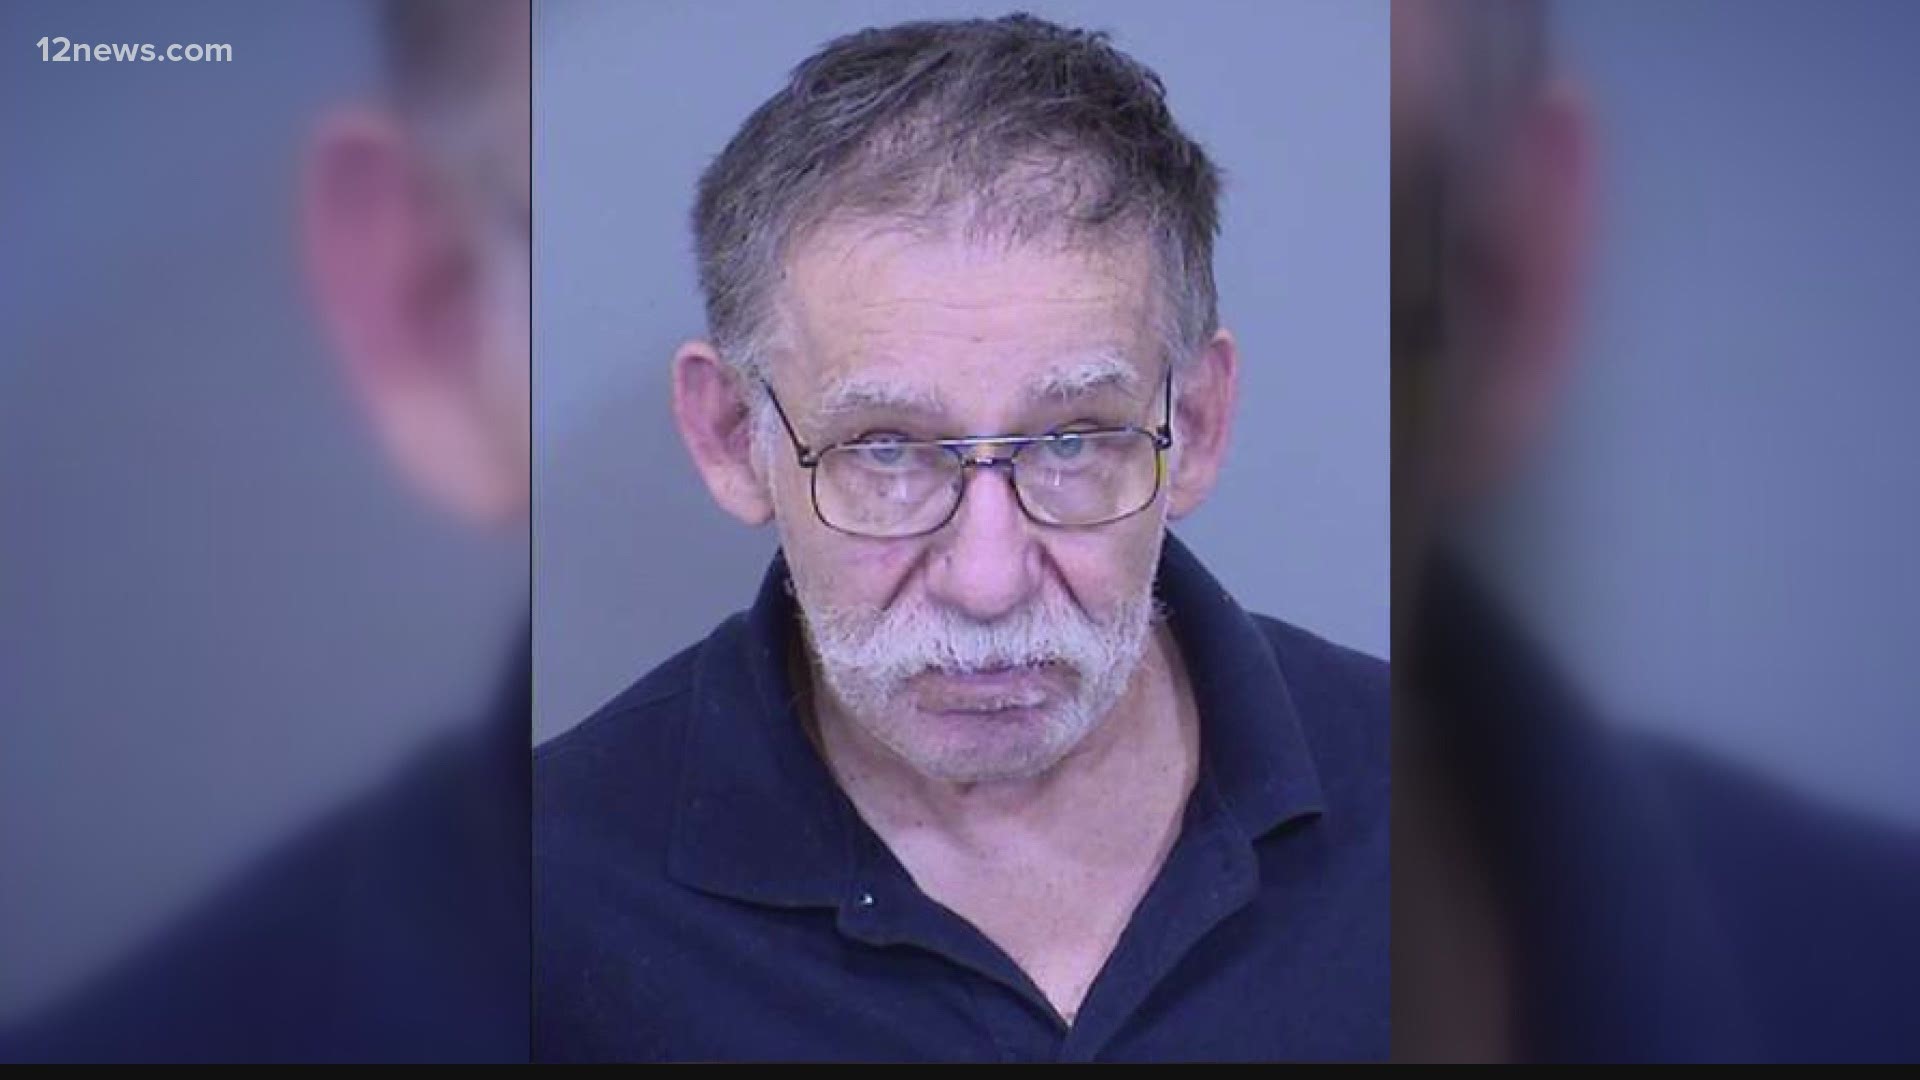 Phoenix police say 69-year-old Hugh Brand was intending to rape a teenage girl, kill her and dump her body. His bond has been set at $2 million.